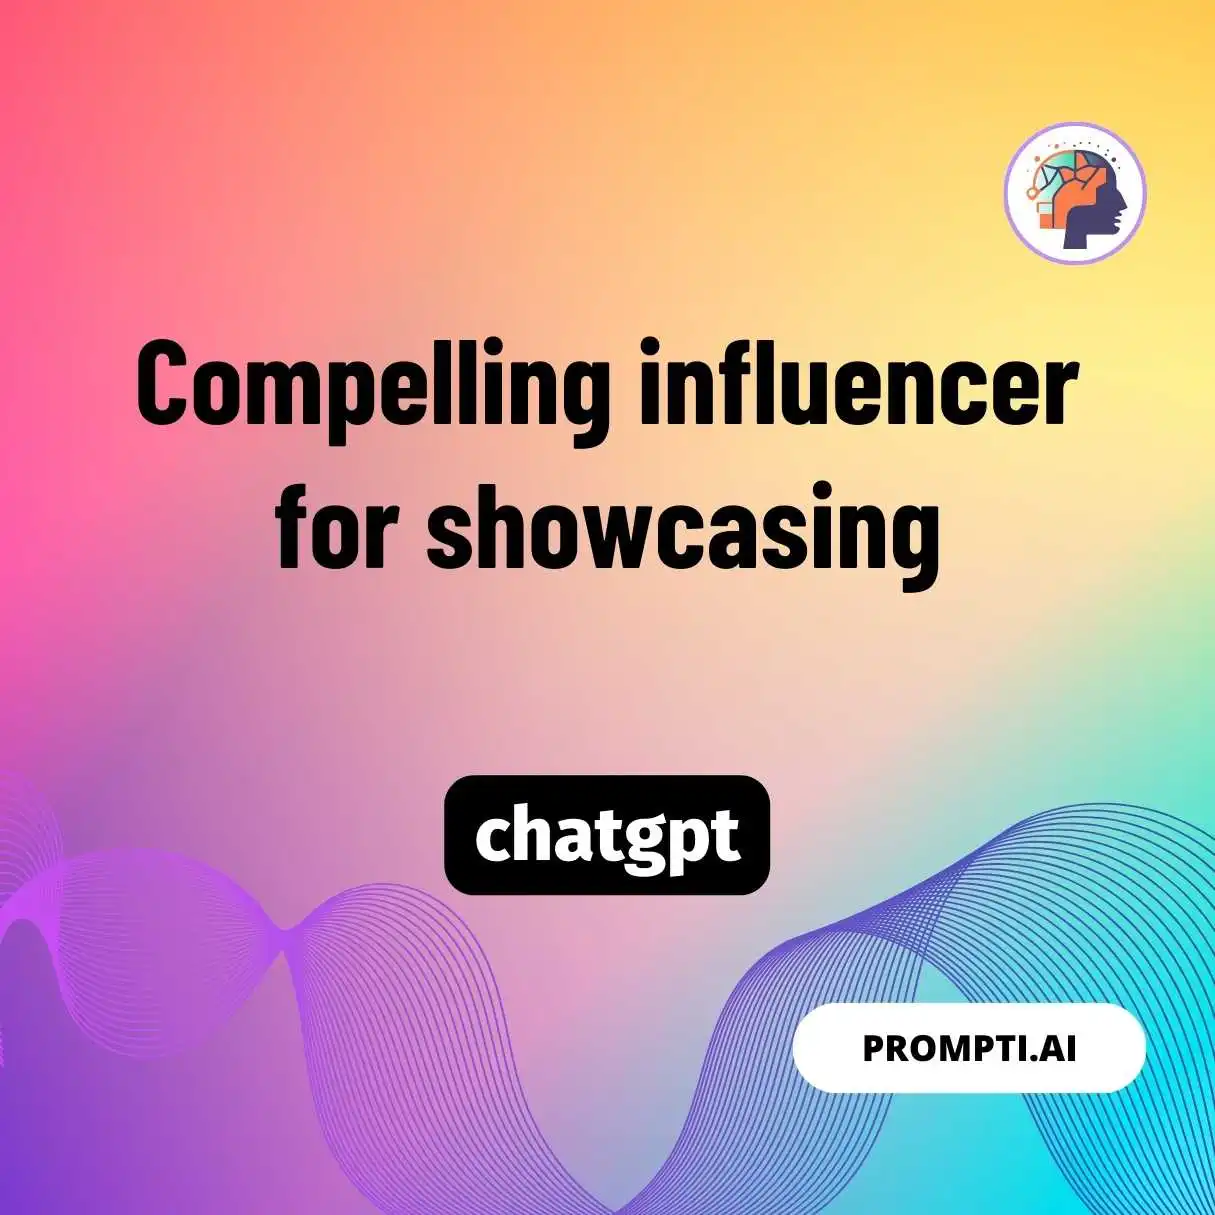 Compelling influencer for showcasing